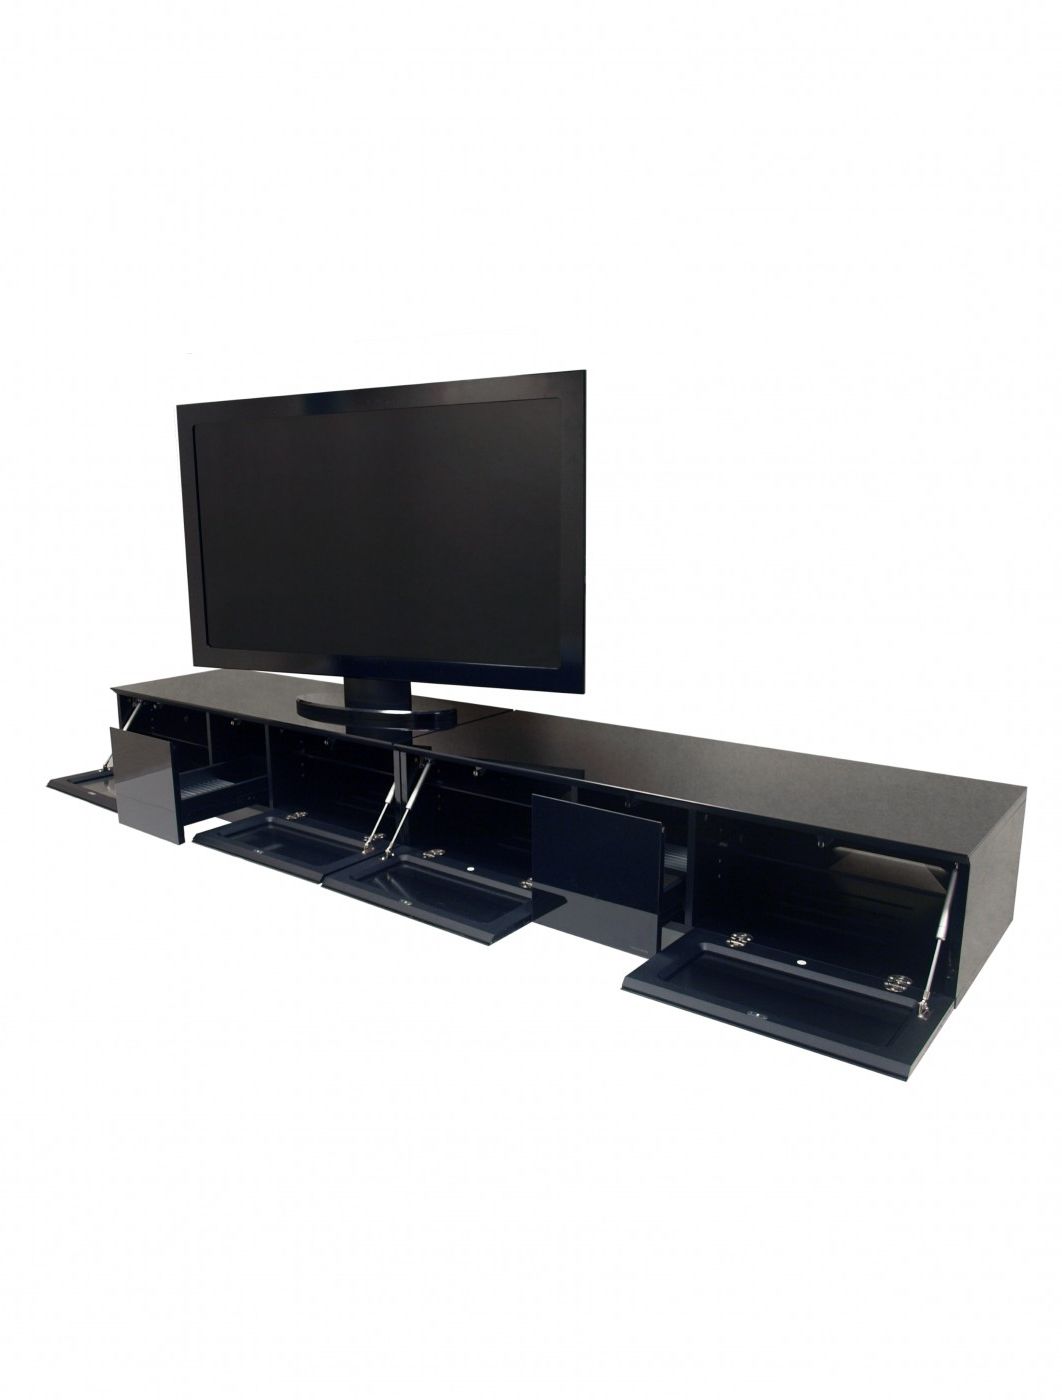 57'' Tv Stands With Open Glass Shelves Gray & Black Finsh Throughout Best And Newest Tv Stand Element Modular Emtmod2500 Blk Tv Cabinet (View 3 of 10)